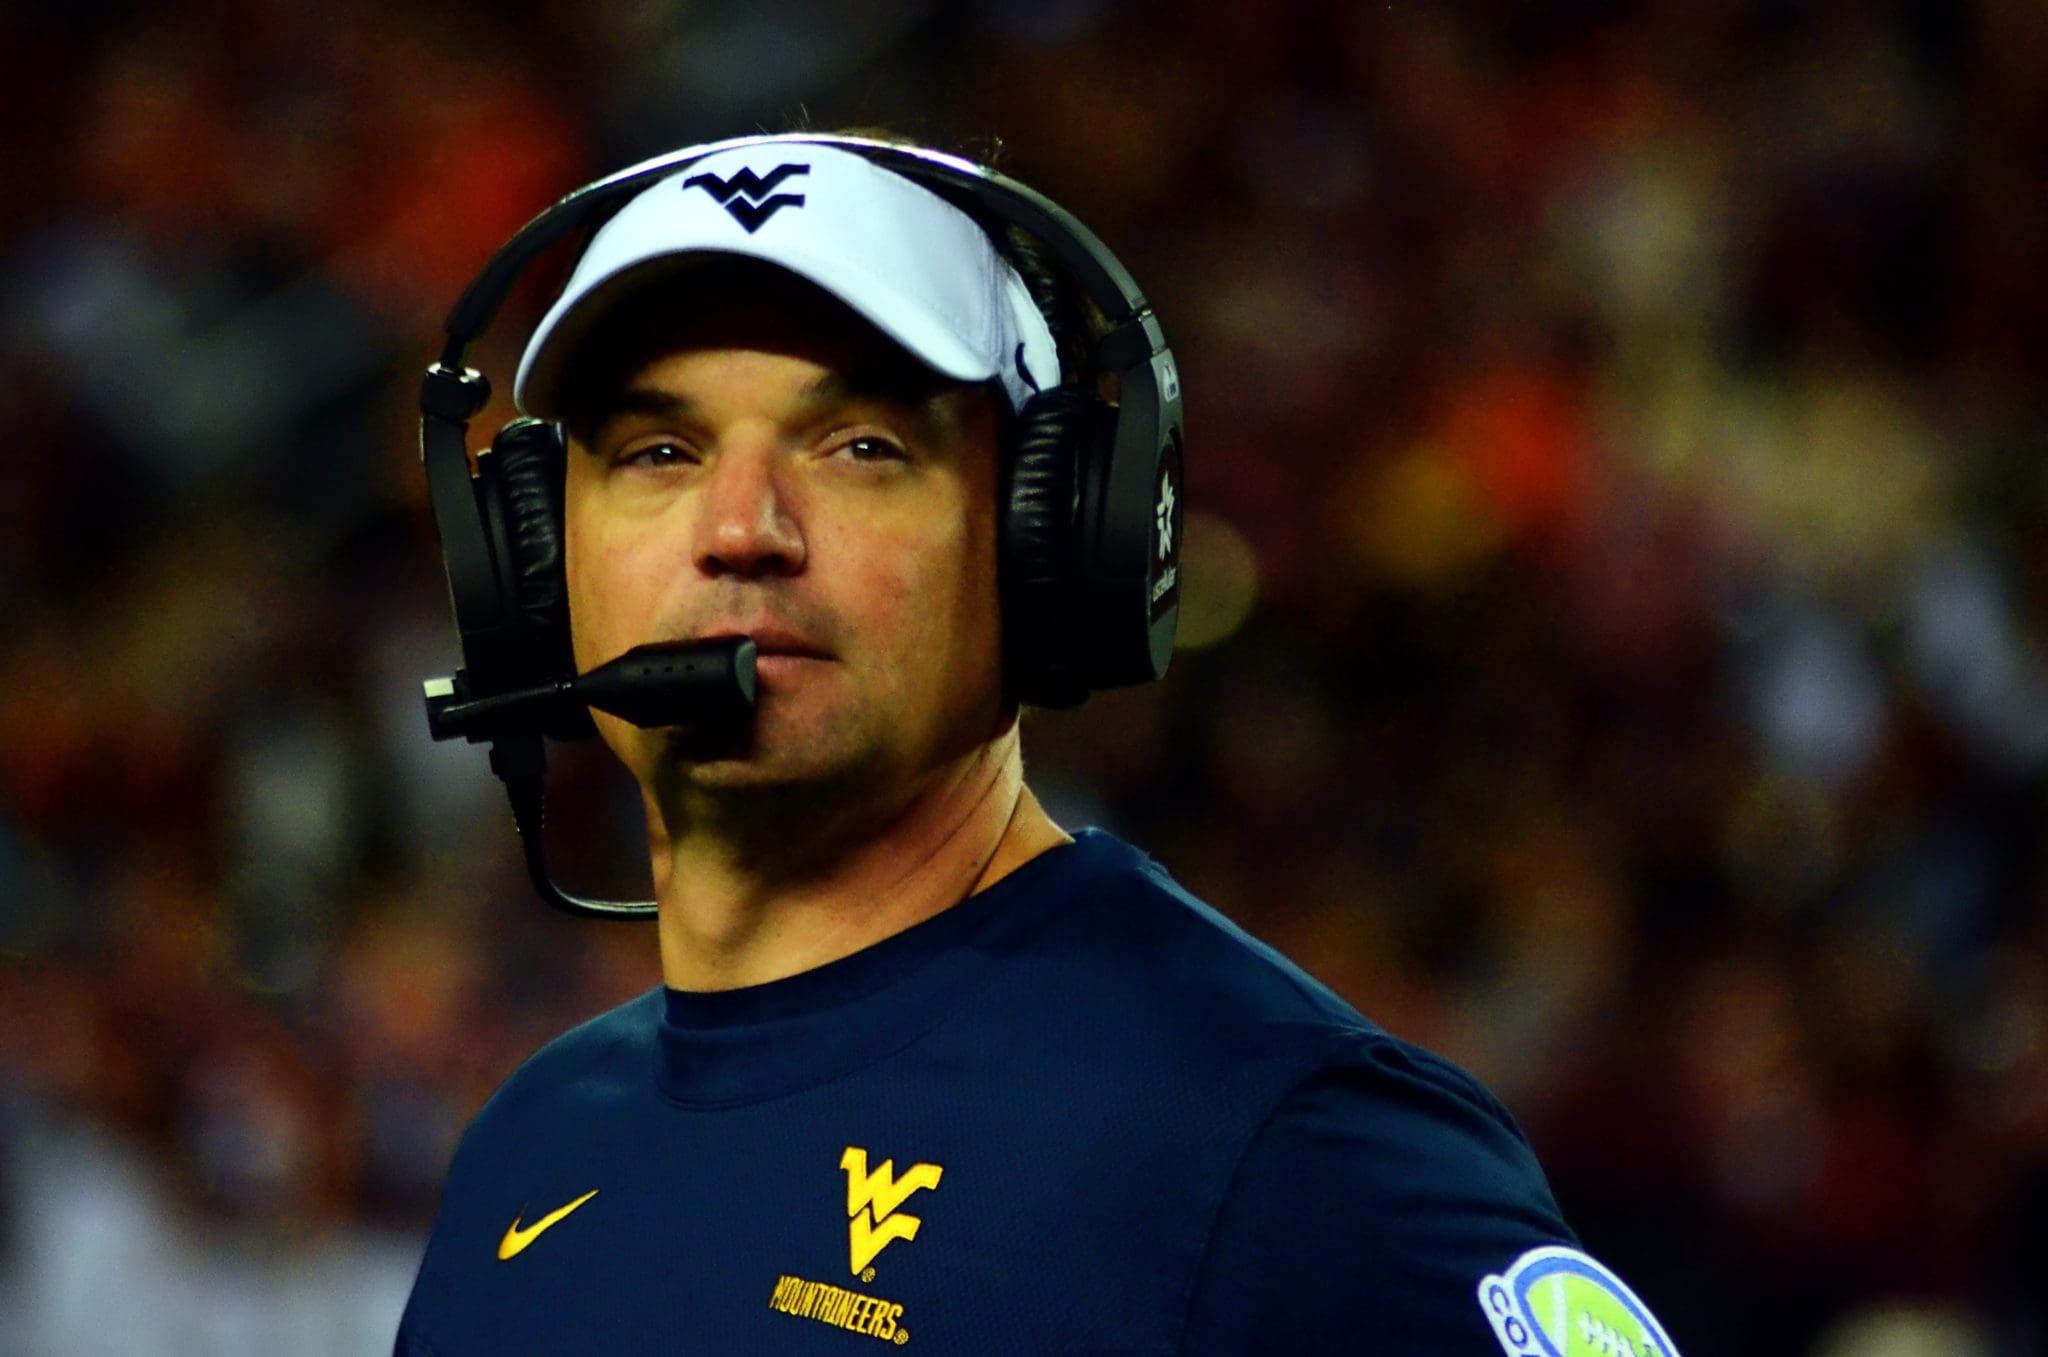 Neal Brown